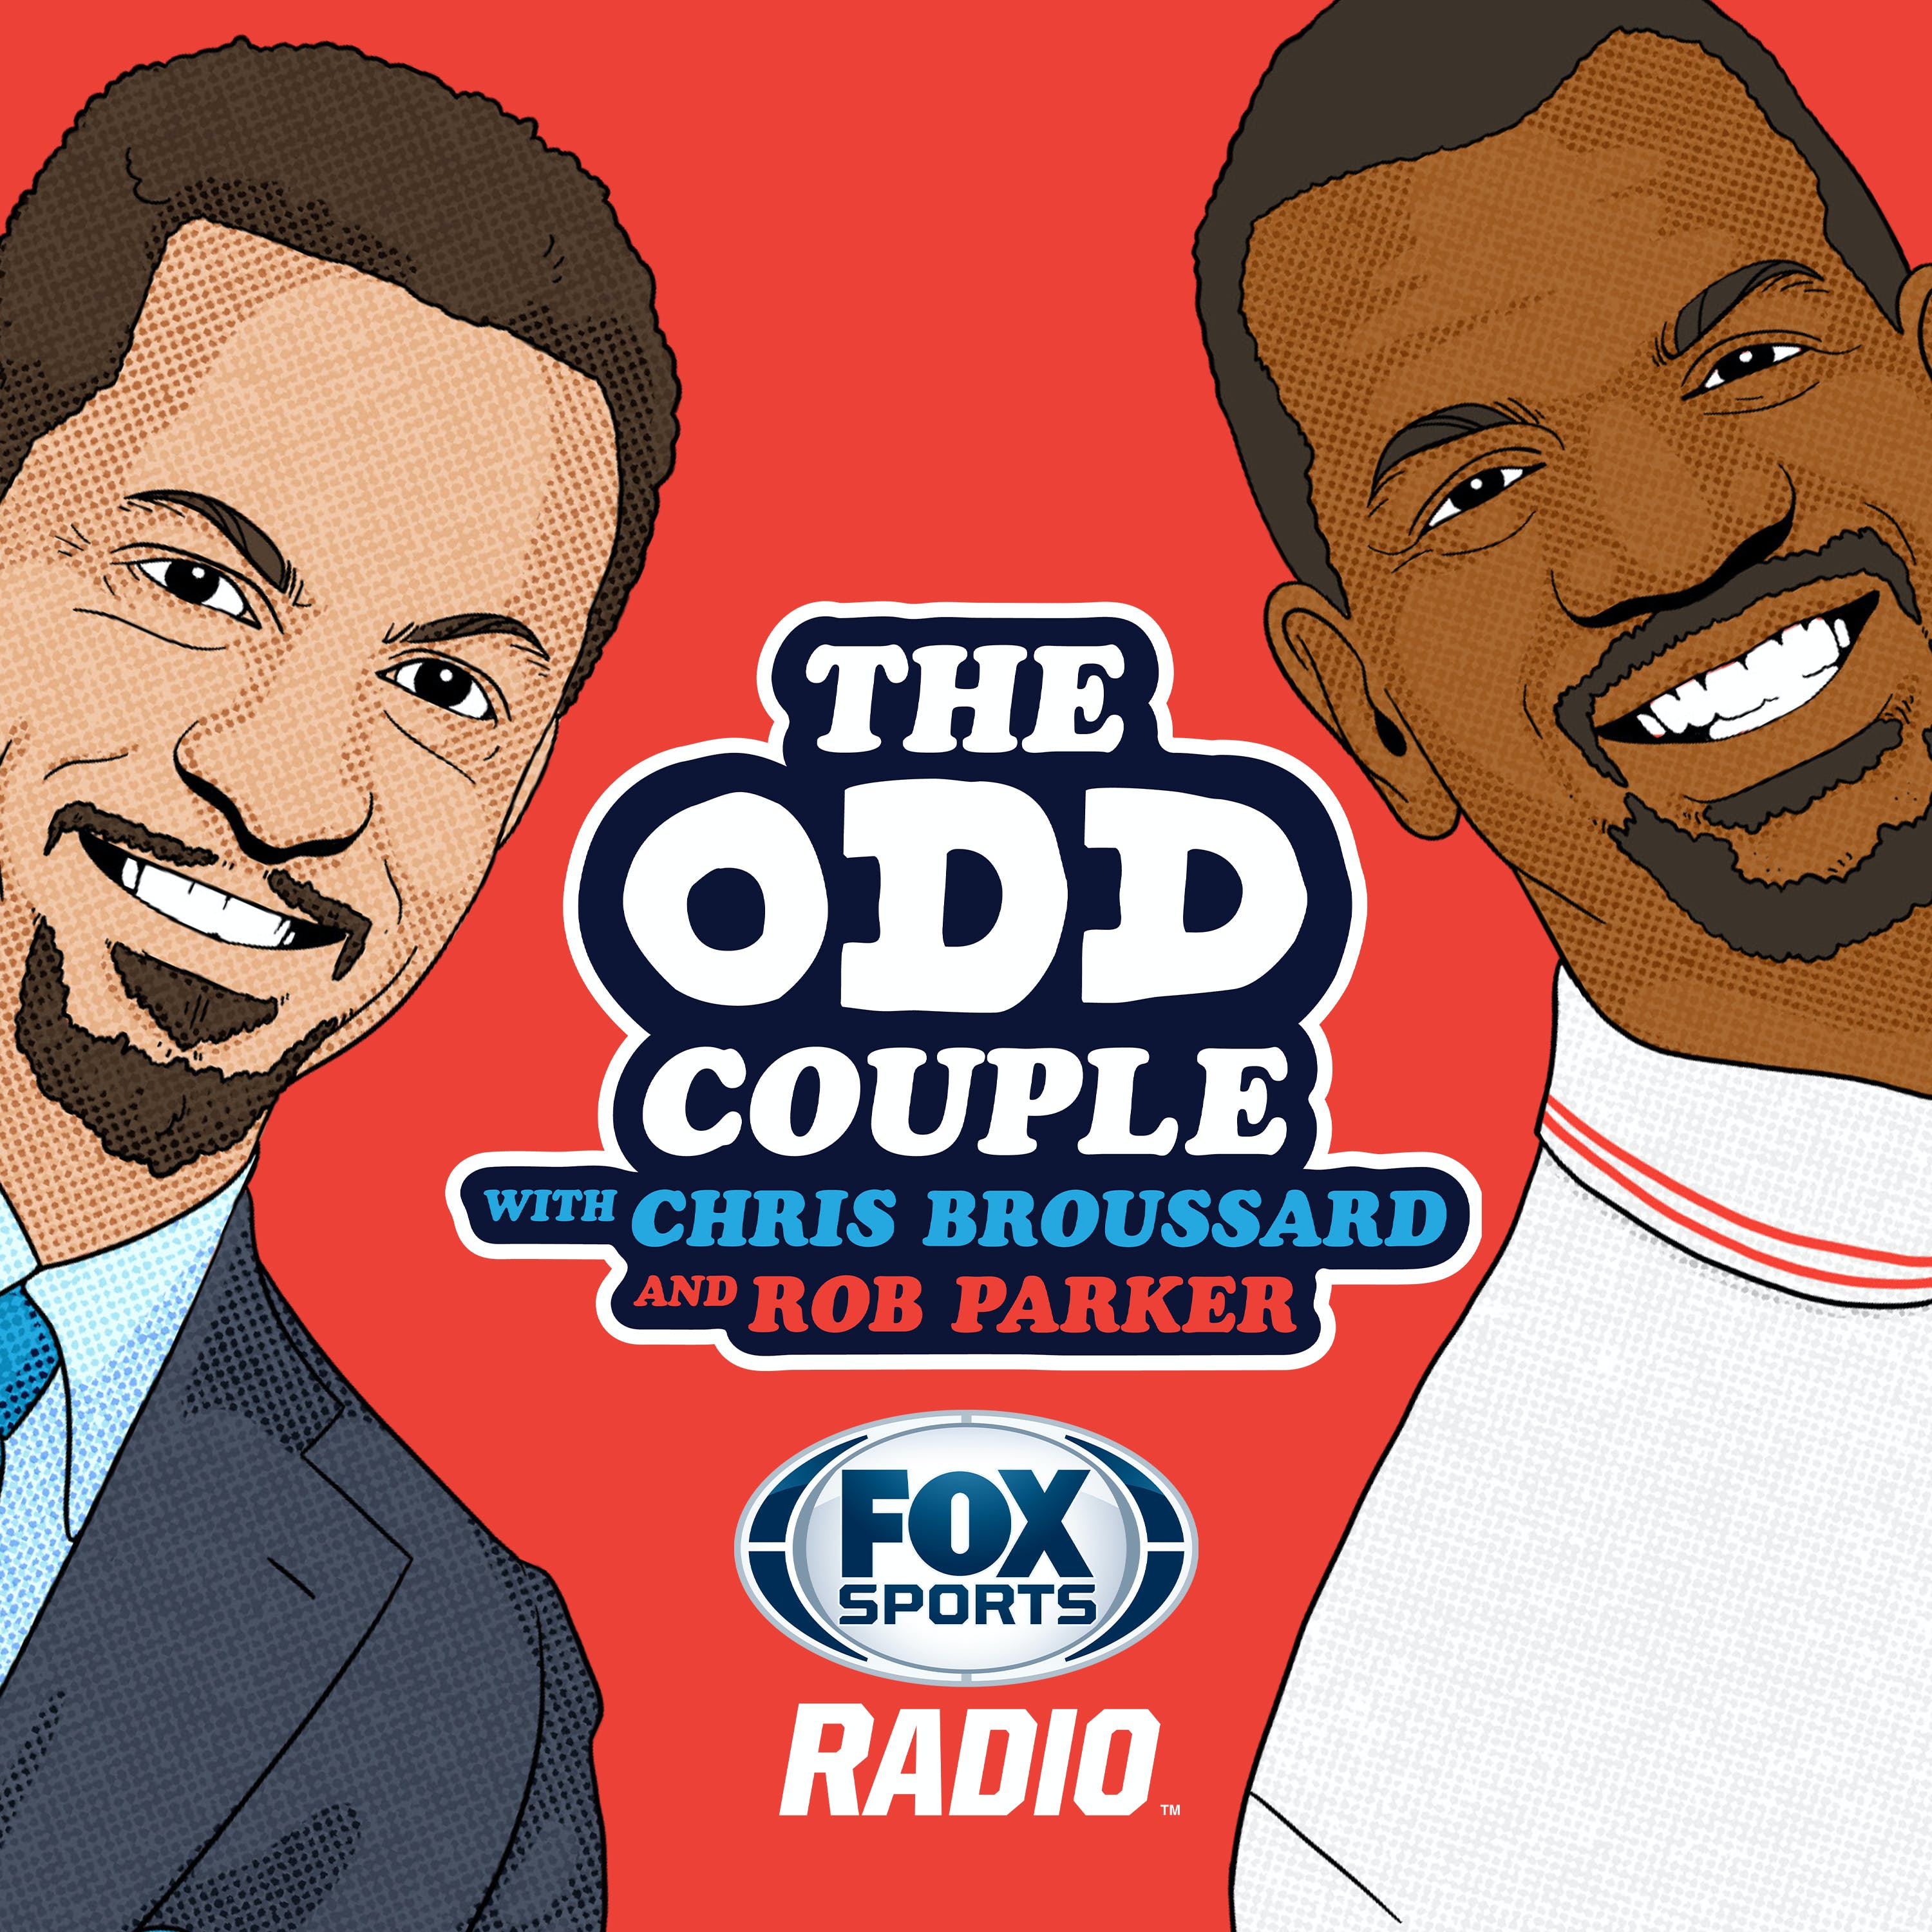 04/19/2021 - Best Of The Odd Couple